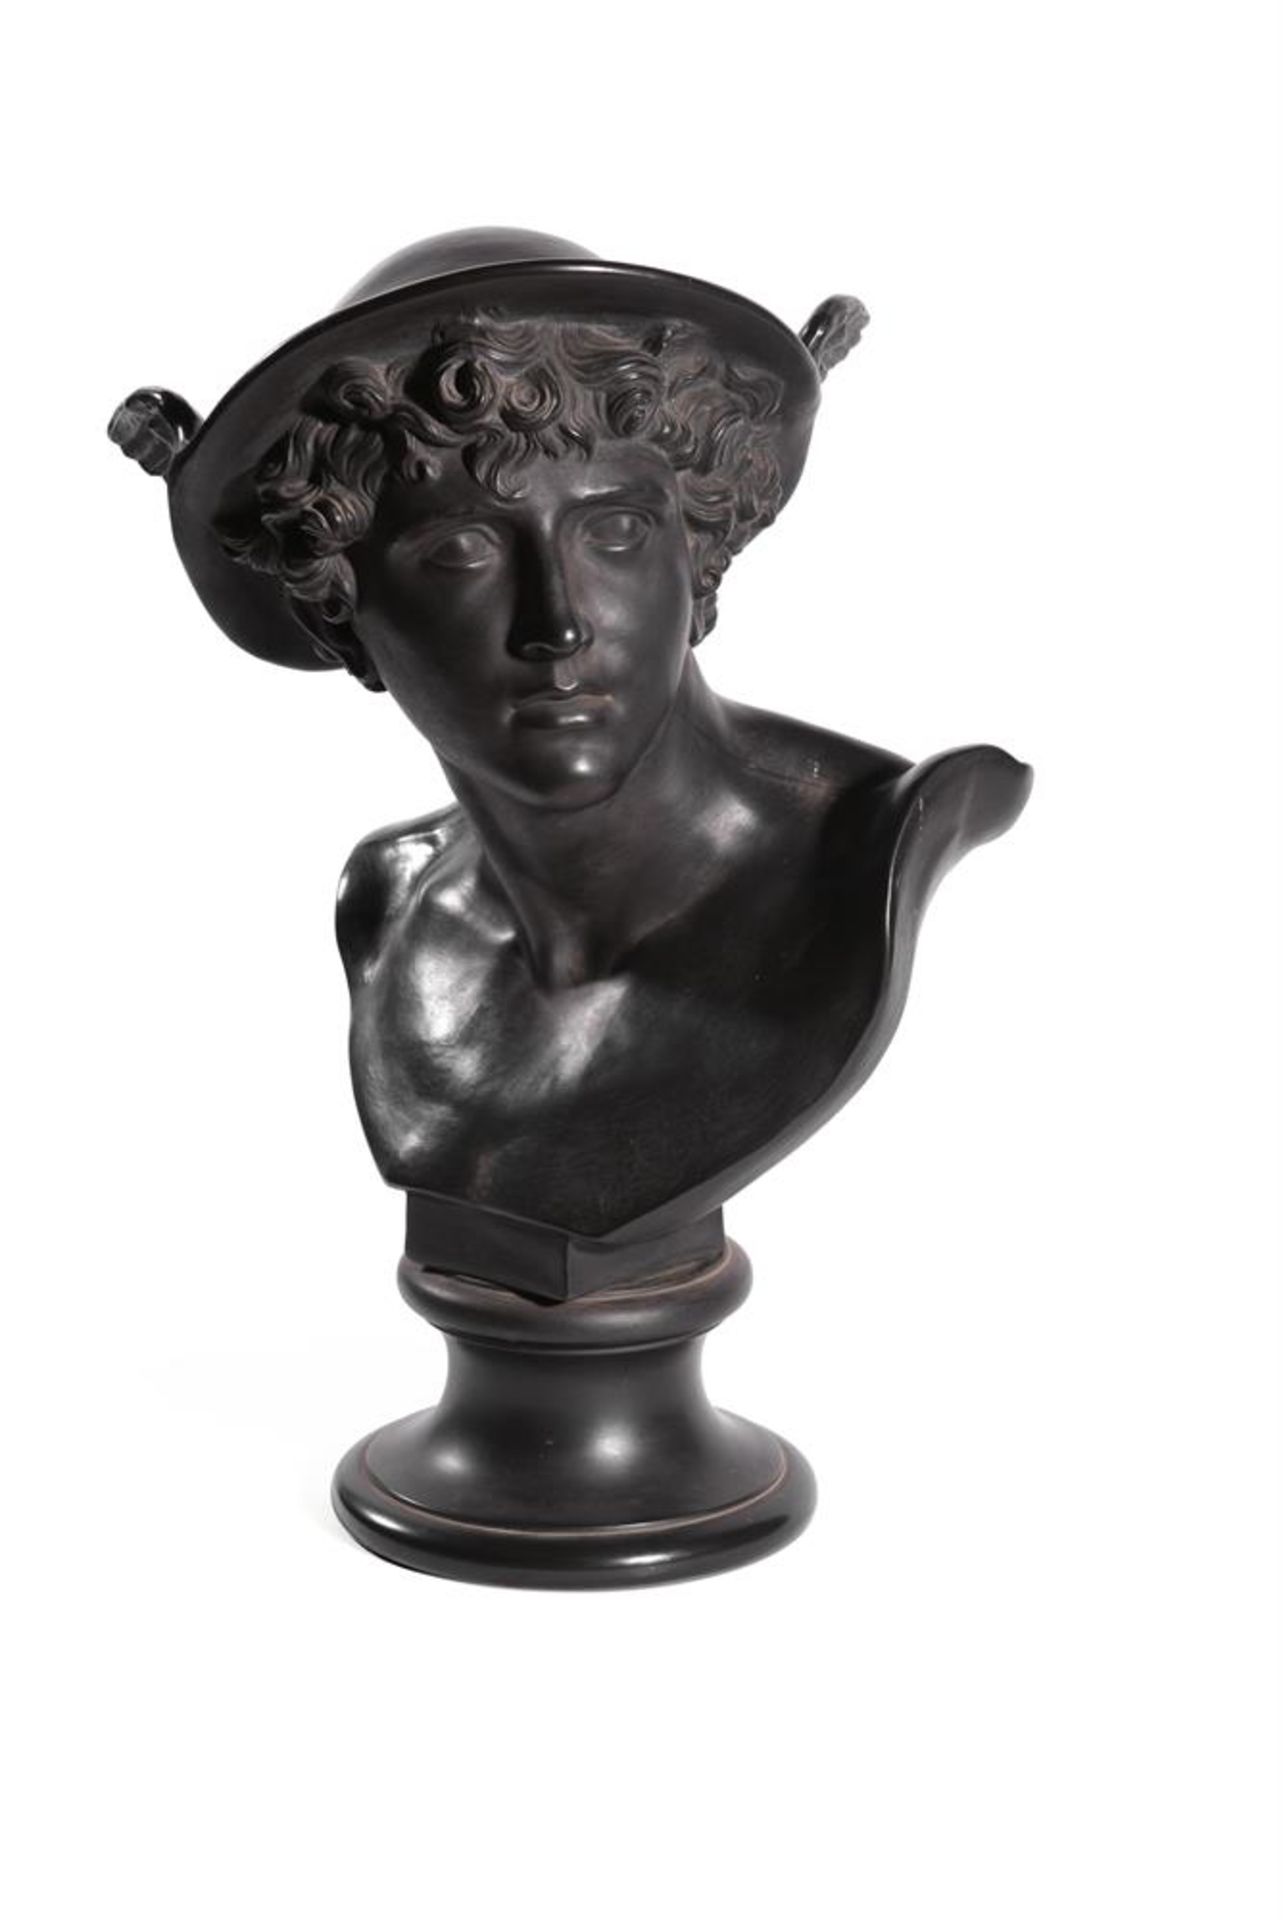 A WEDGWOOD BLACK BASALT BUST OF MERCURY, LATE 18TH/EARLY 19TH CENTURY